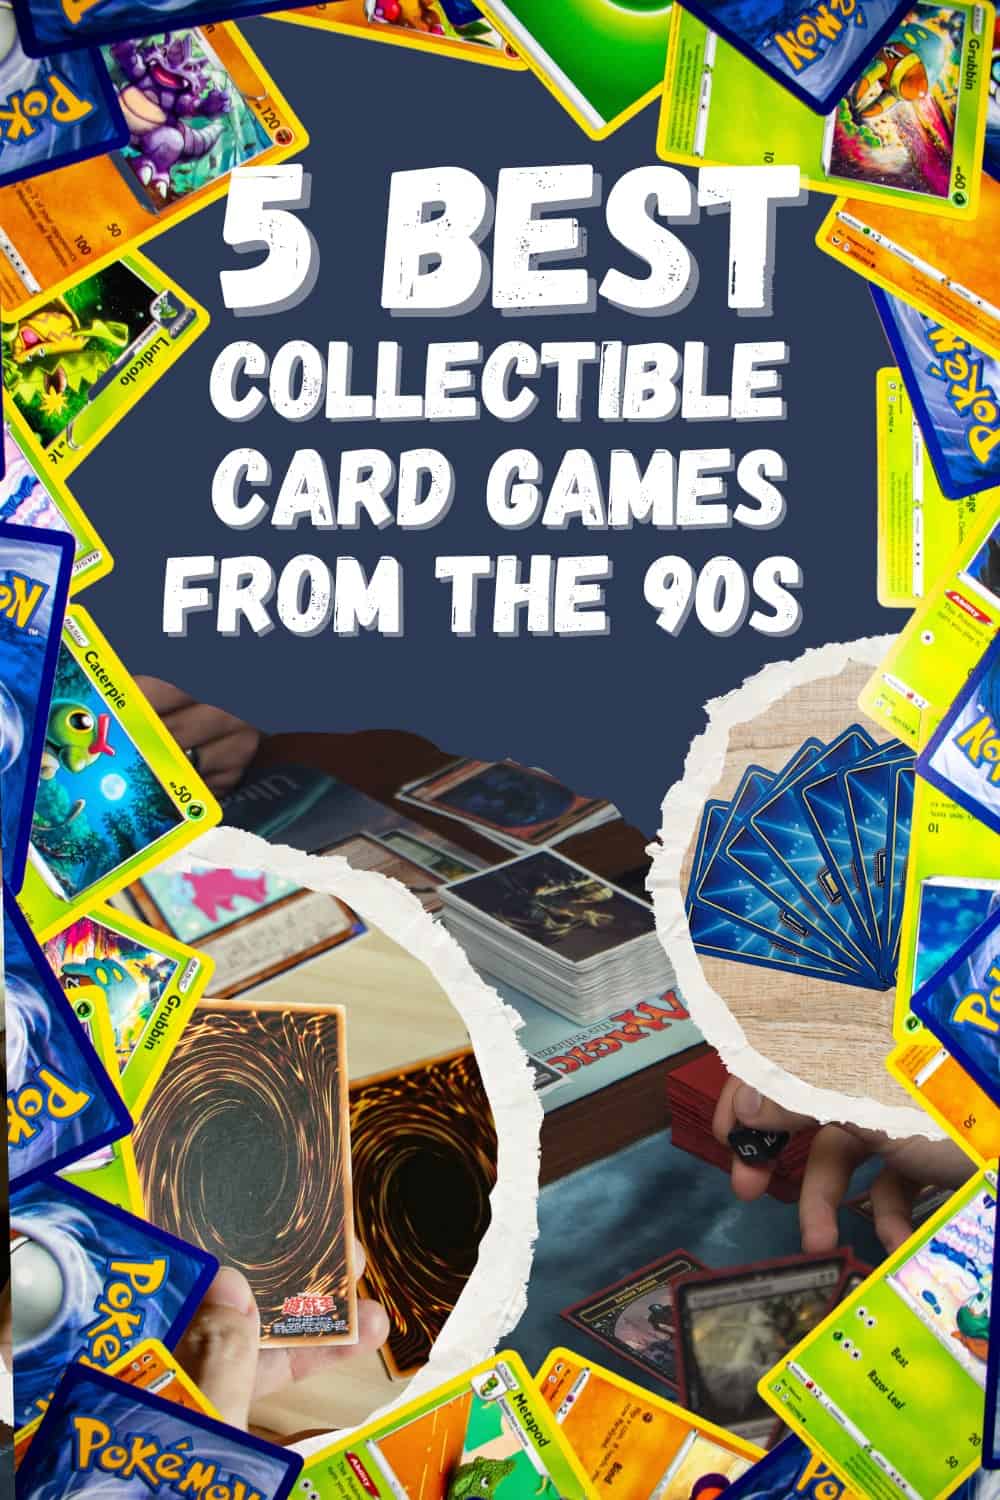 List of Trading Card Games From the 1990s